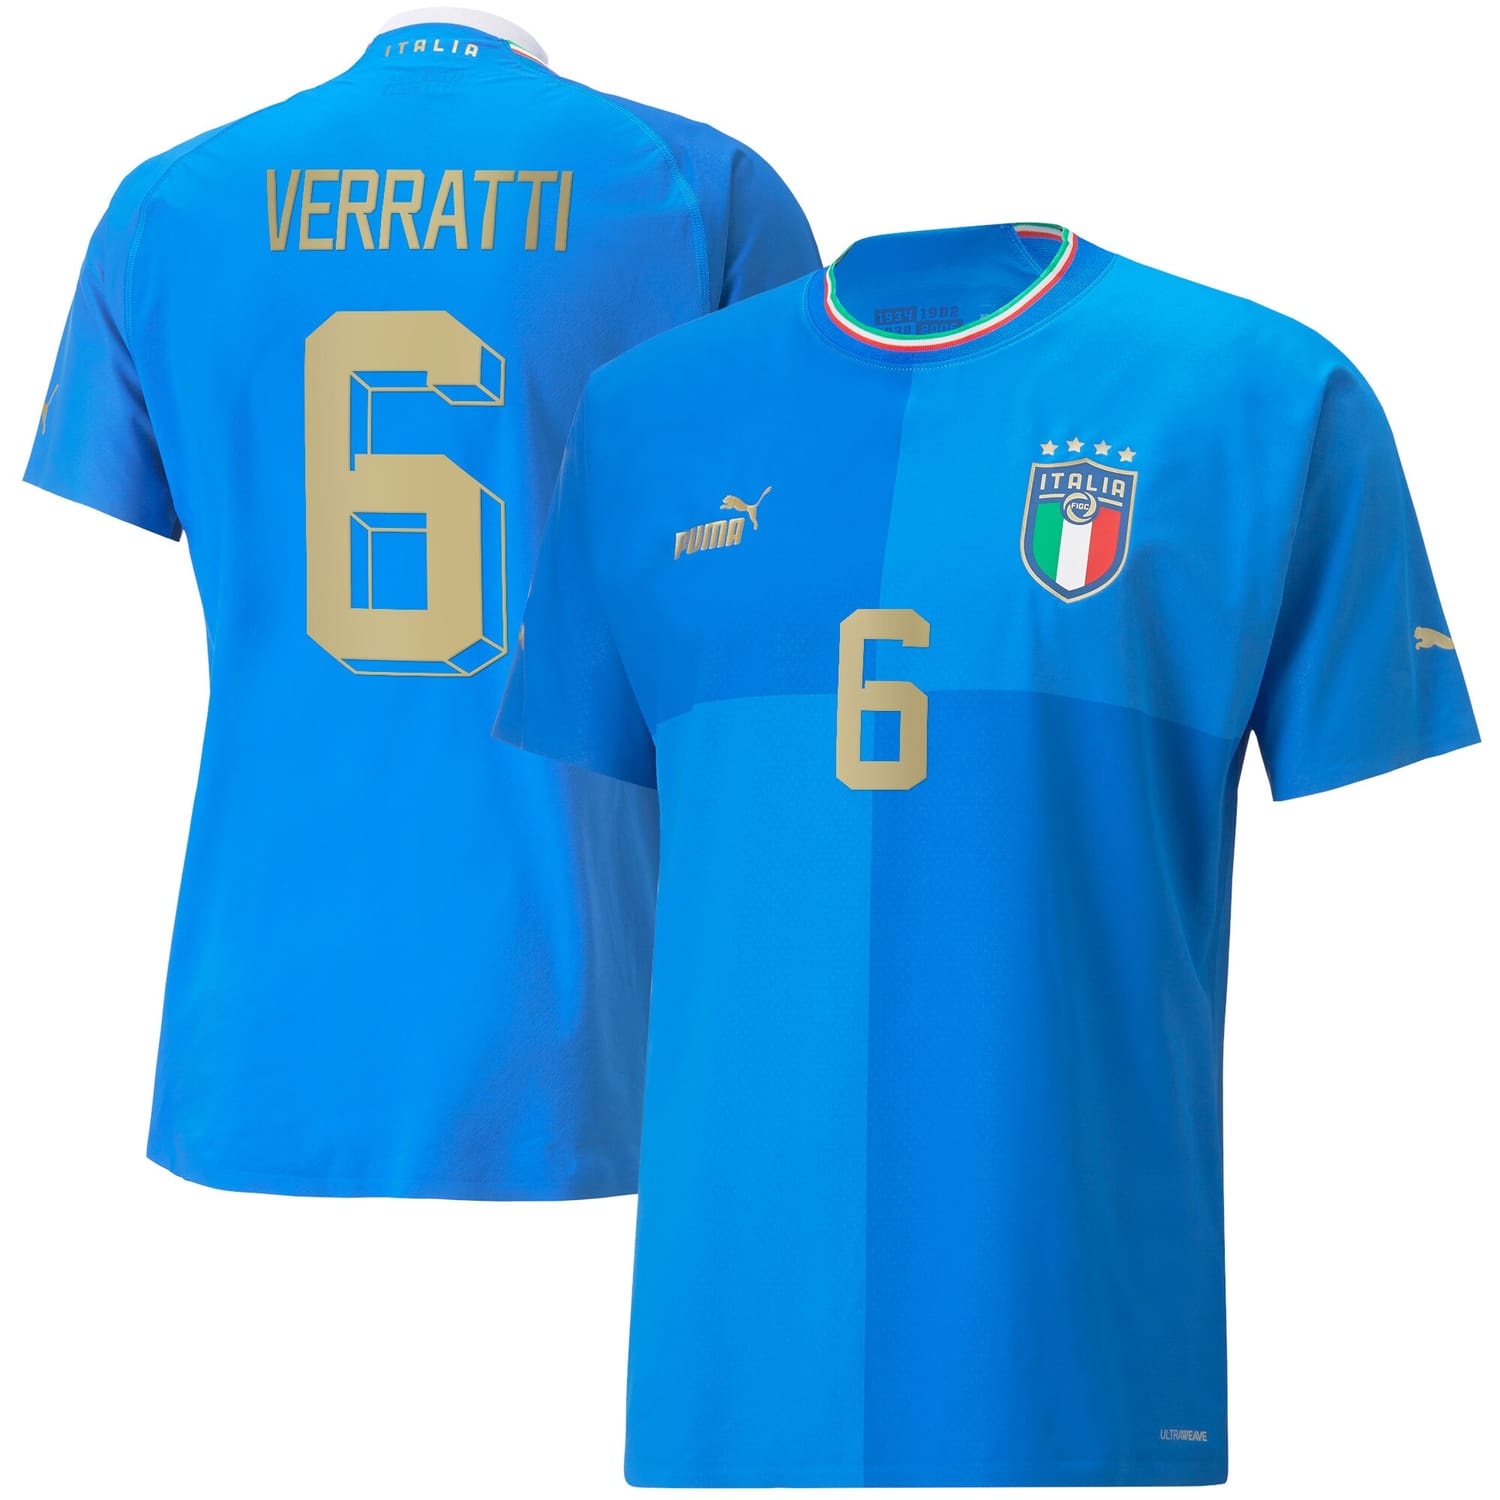 Italy National Team Home Authentic Jersey Shirt player Verratti 6 printing for Men